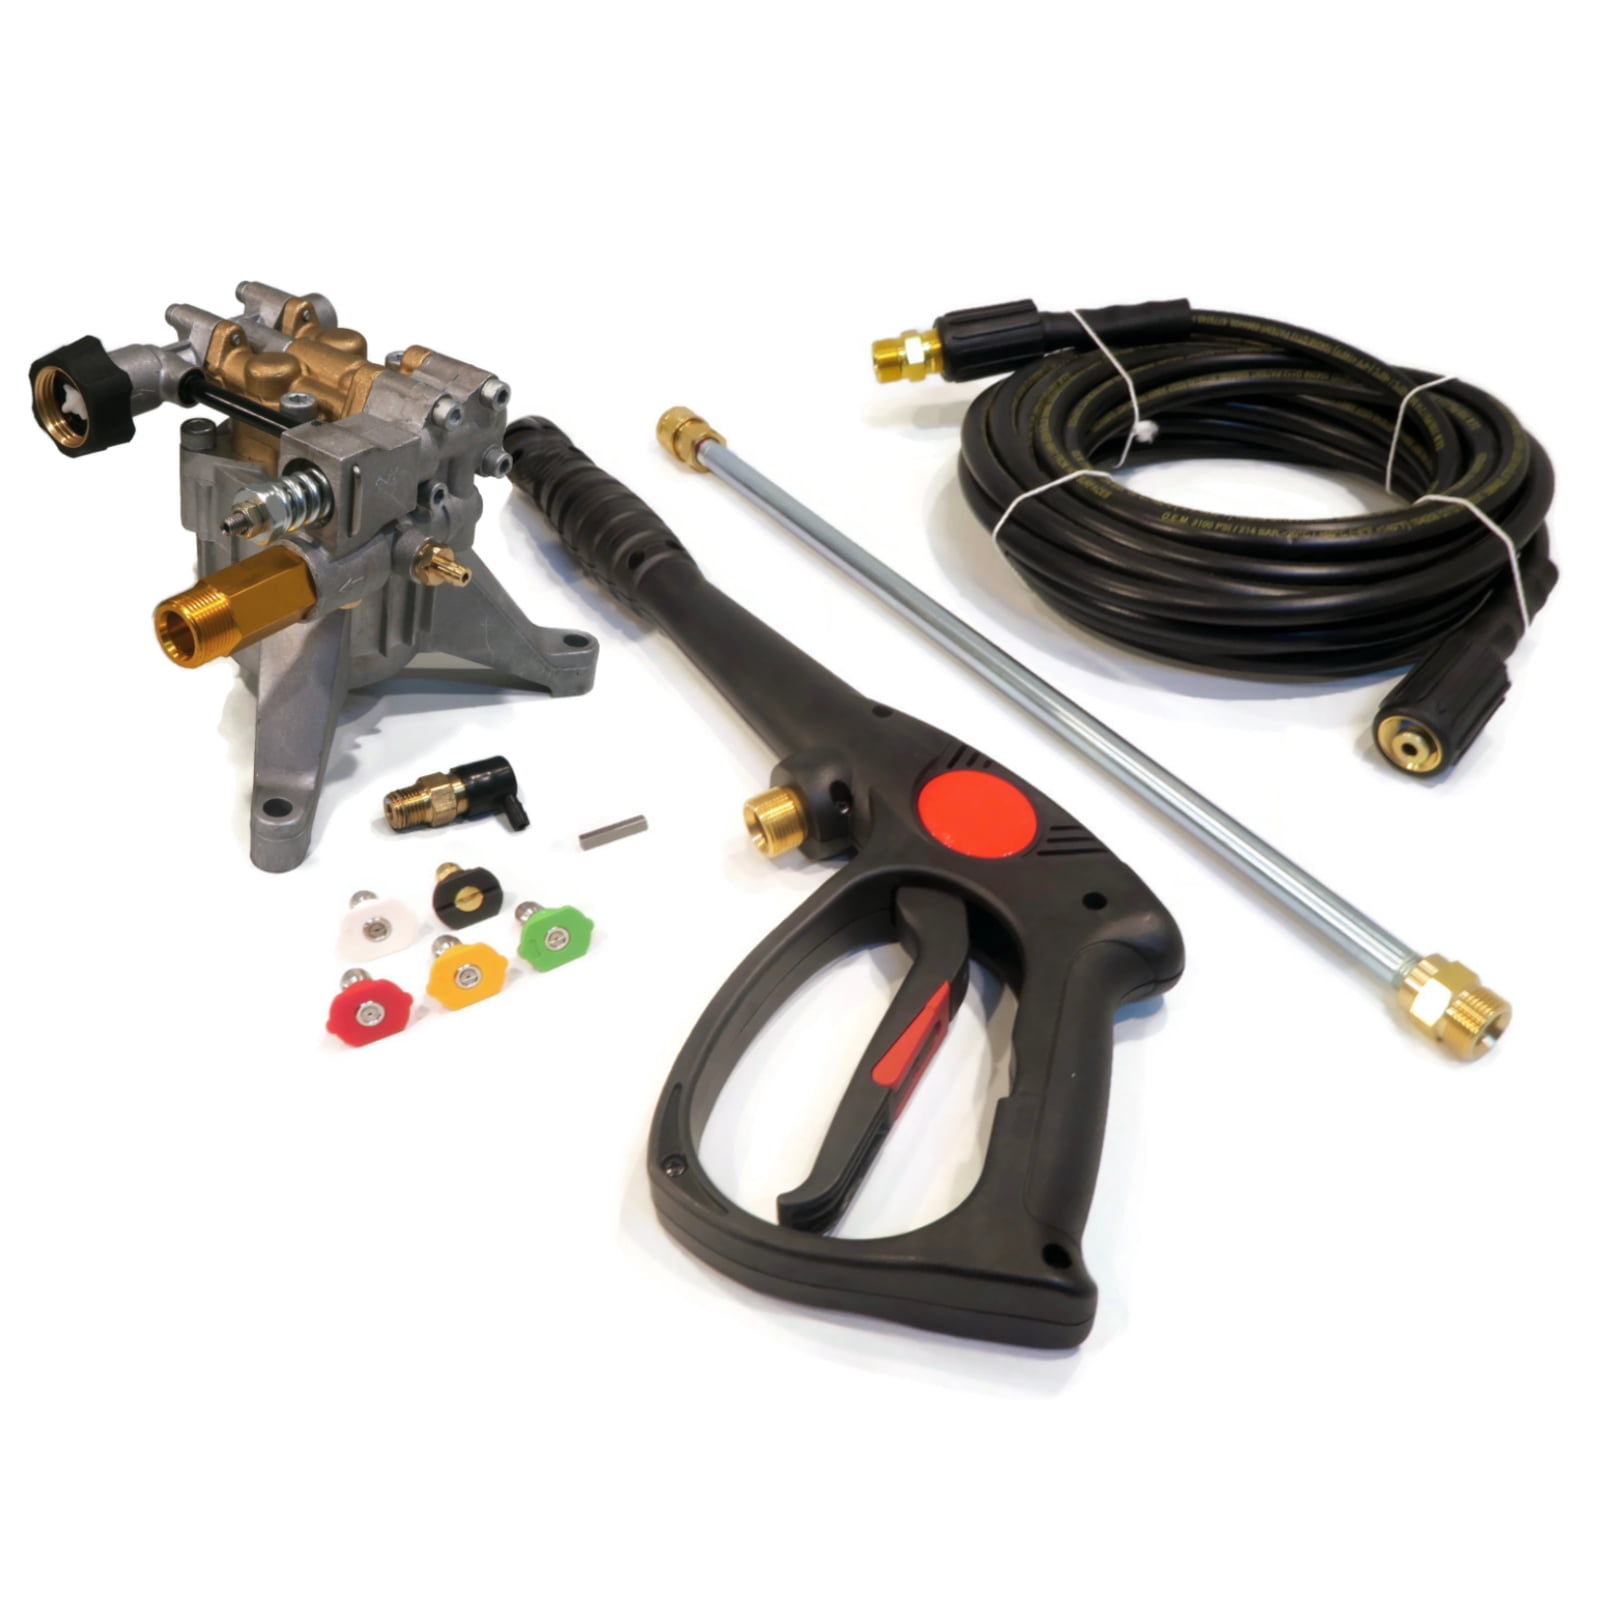 POWER PRESSURE WASHER WATER PUMP & SPRAY KIT Excell Devilbiss WGV2021  WGV2021-1 